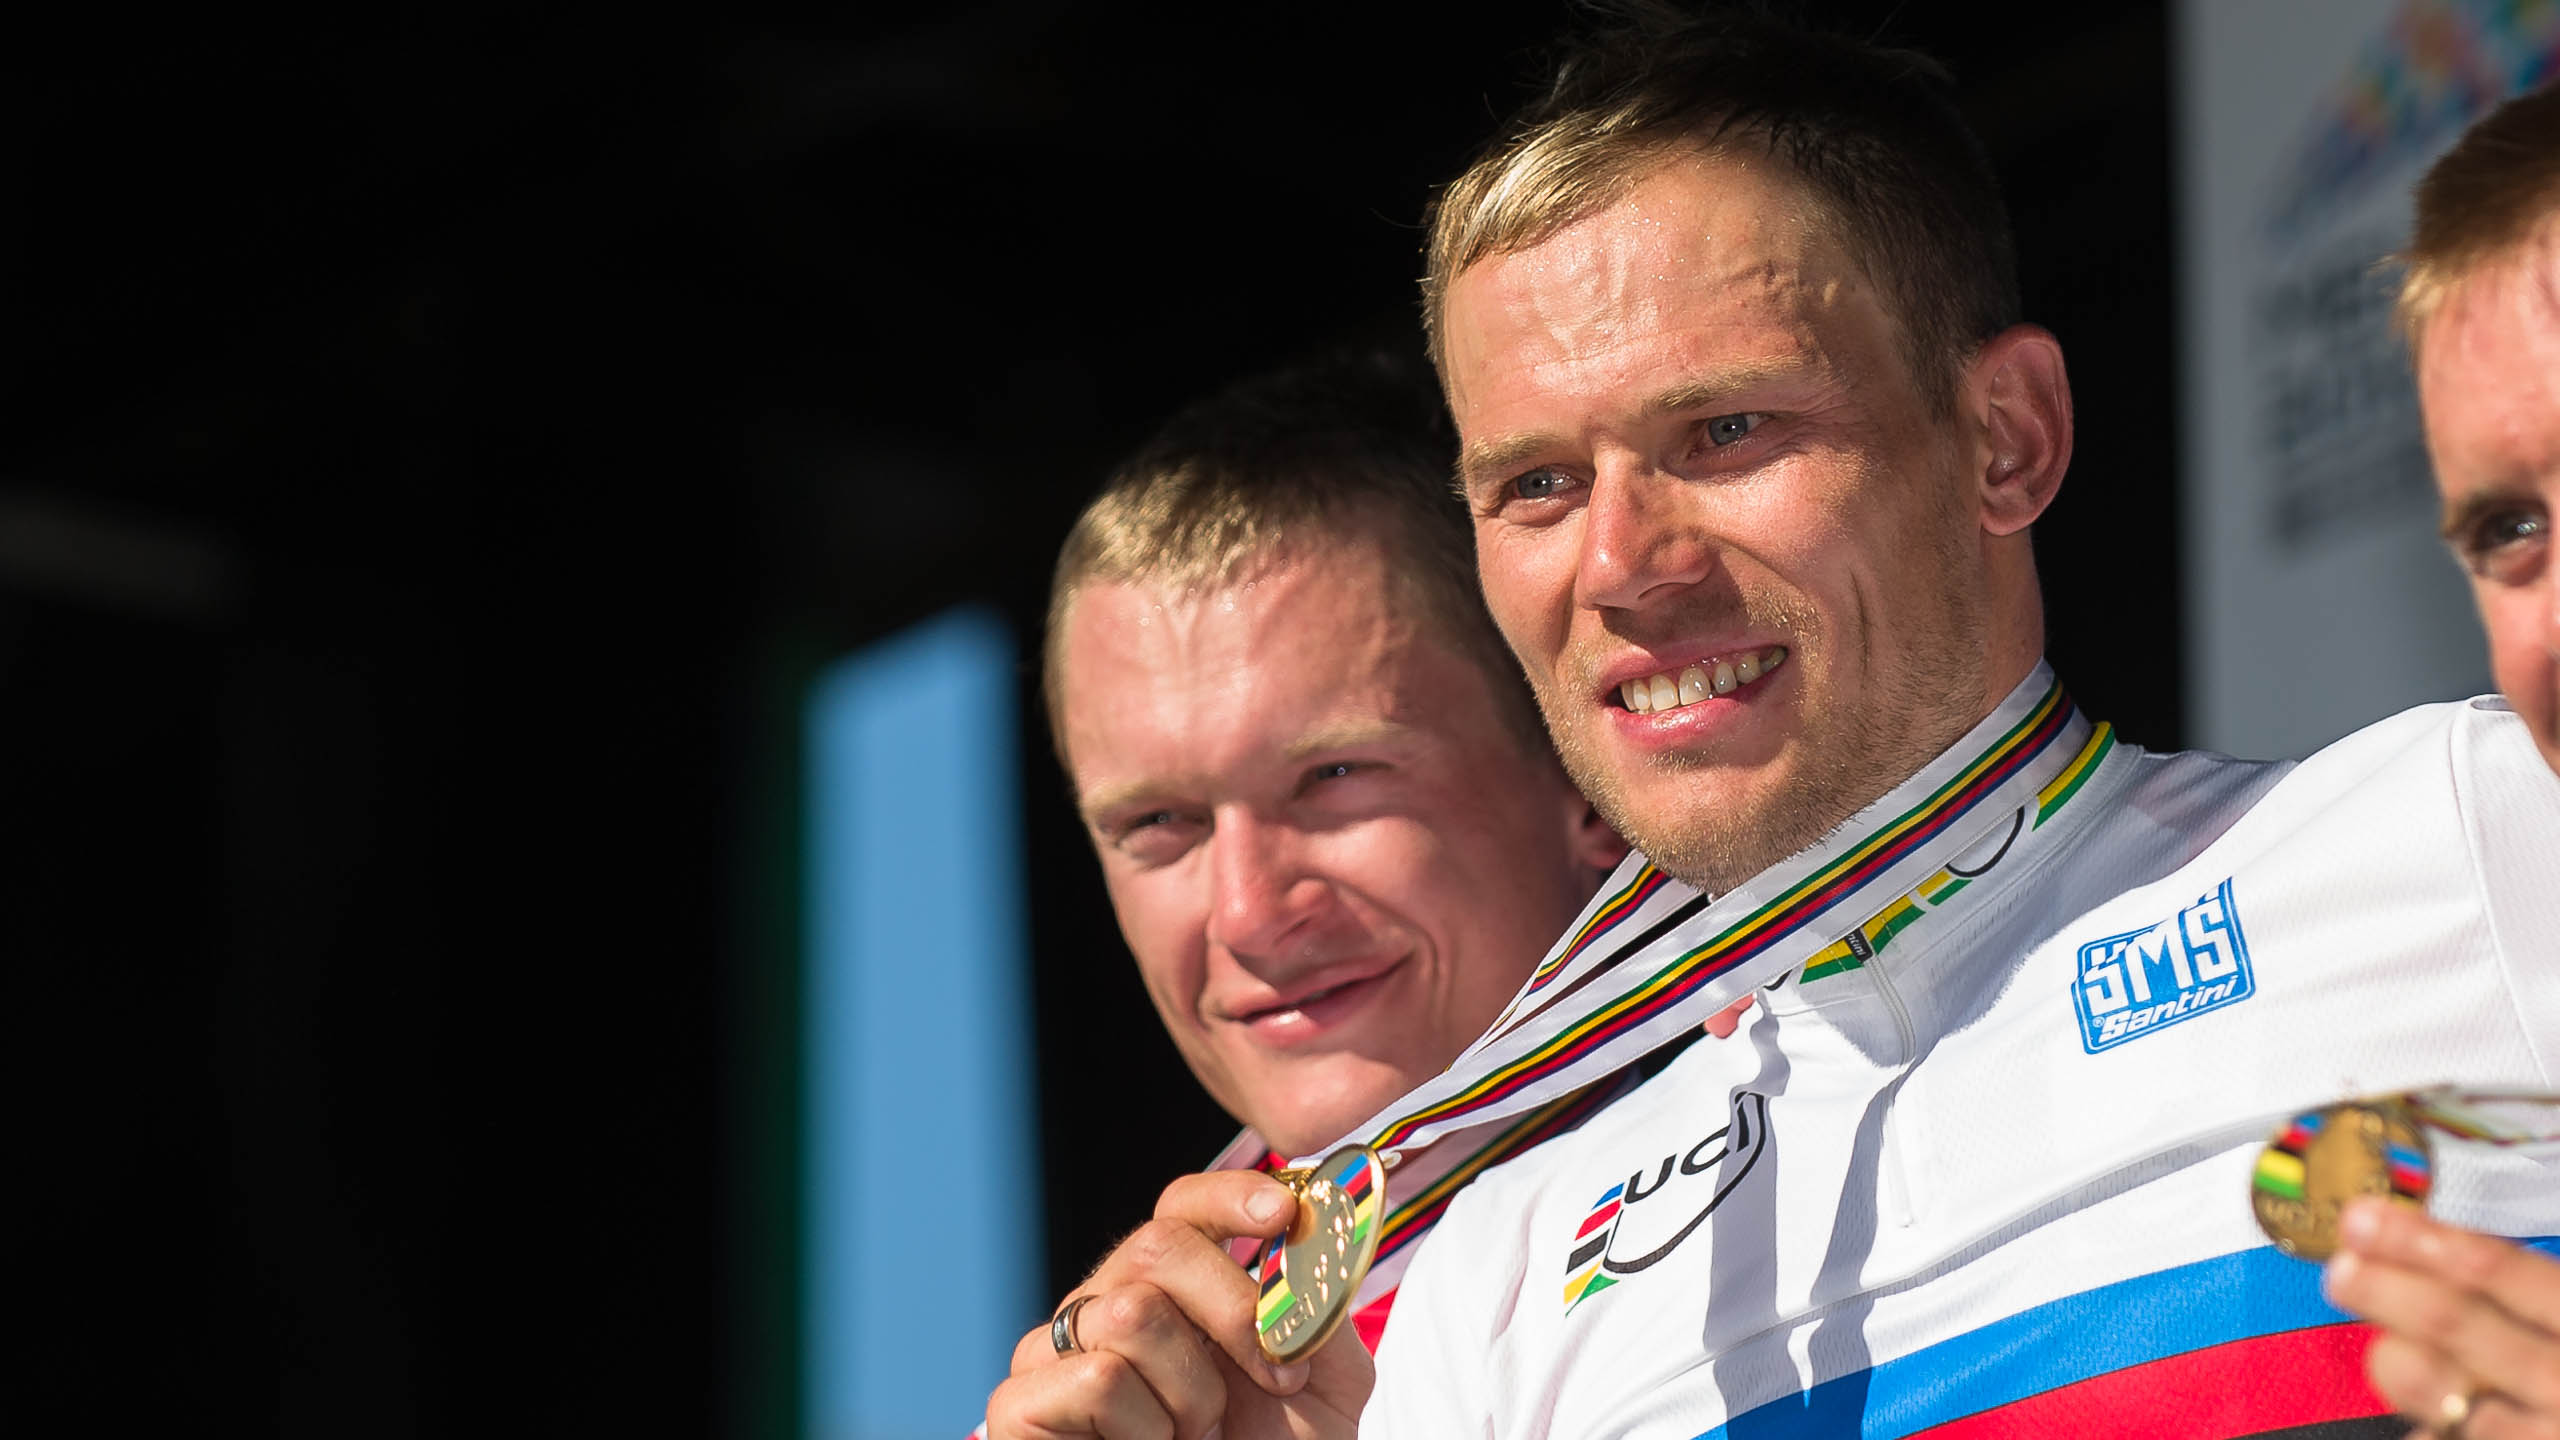 The medalists show off their medals (L to R) Matti Breschel (DEN) silver, Thor Hushovd (NOR) gold, and Allan Davis (AUS) bronze at the 2010 UCI Road World Championships Elite Men Road Race in Geelong, Victoria, Australia.